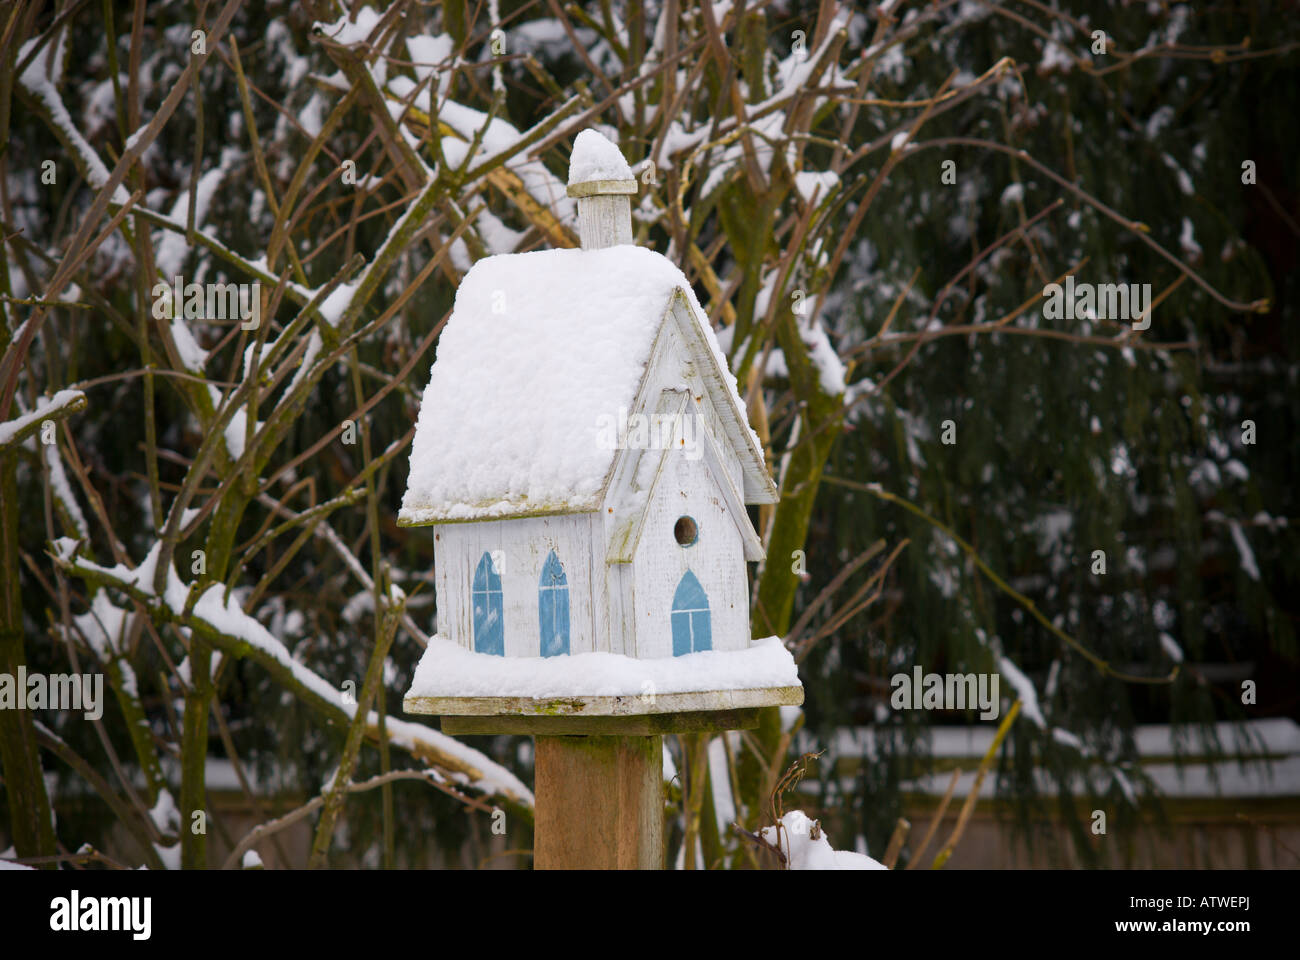 Church style bird house covered in snow Stock Photo